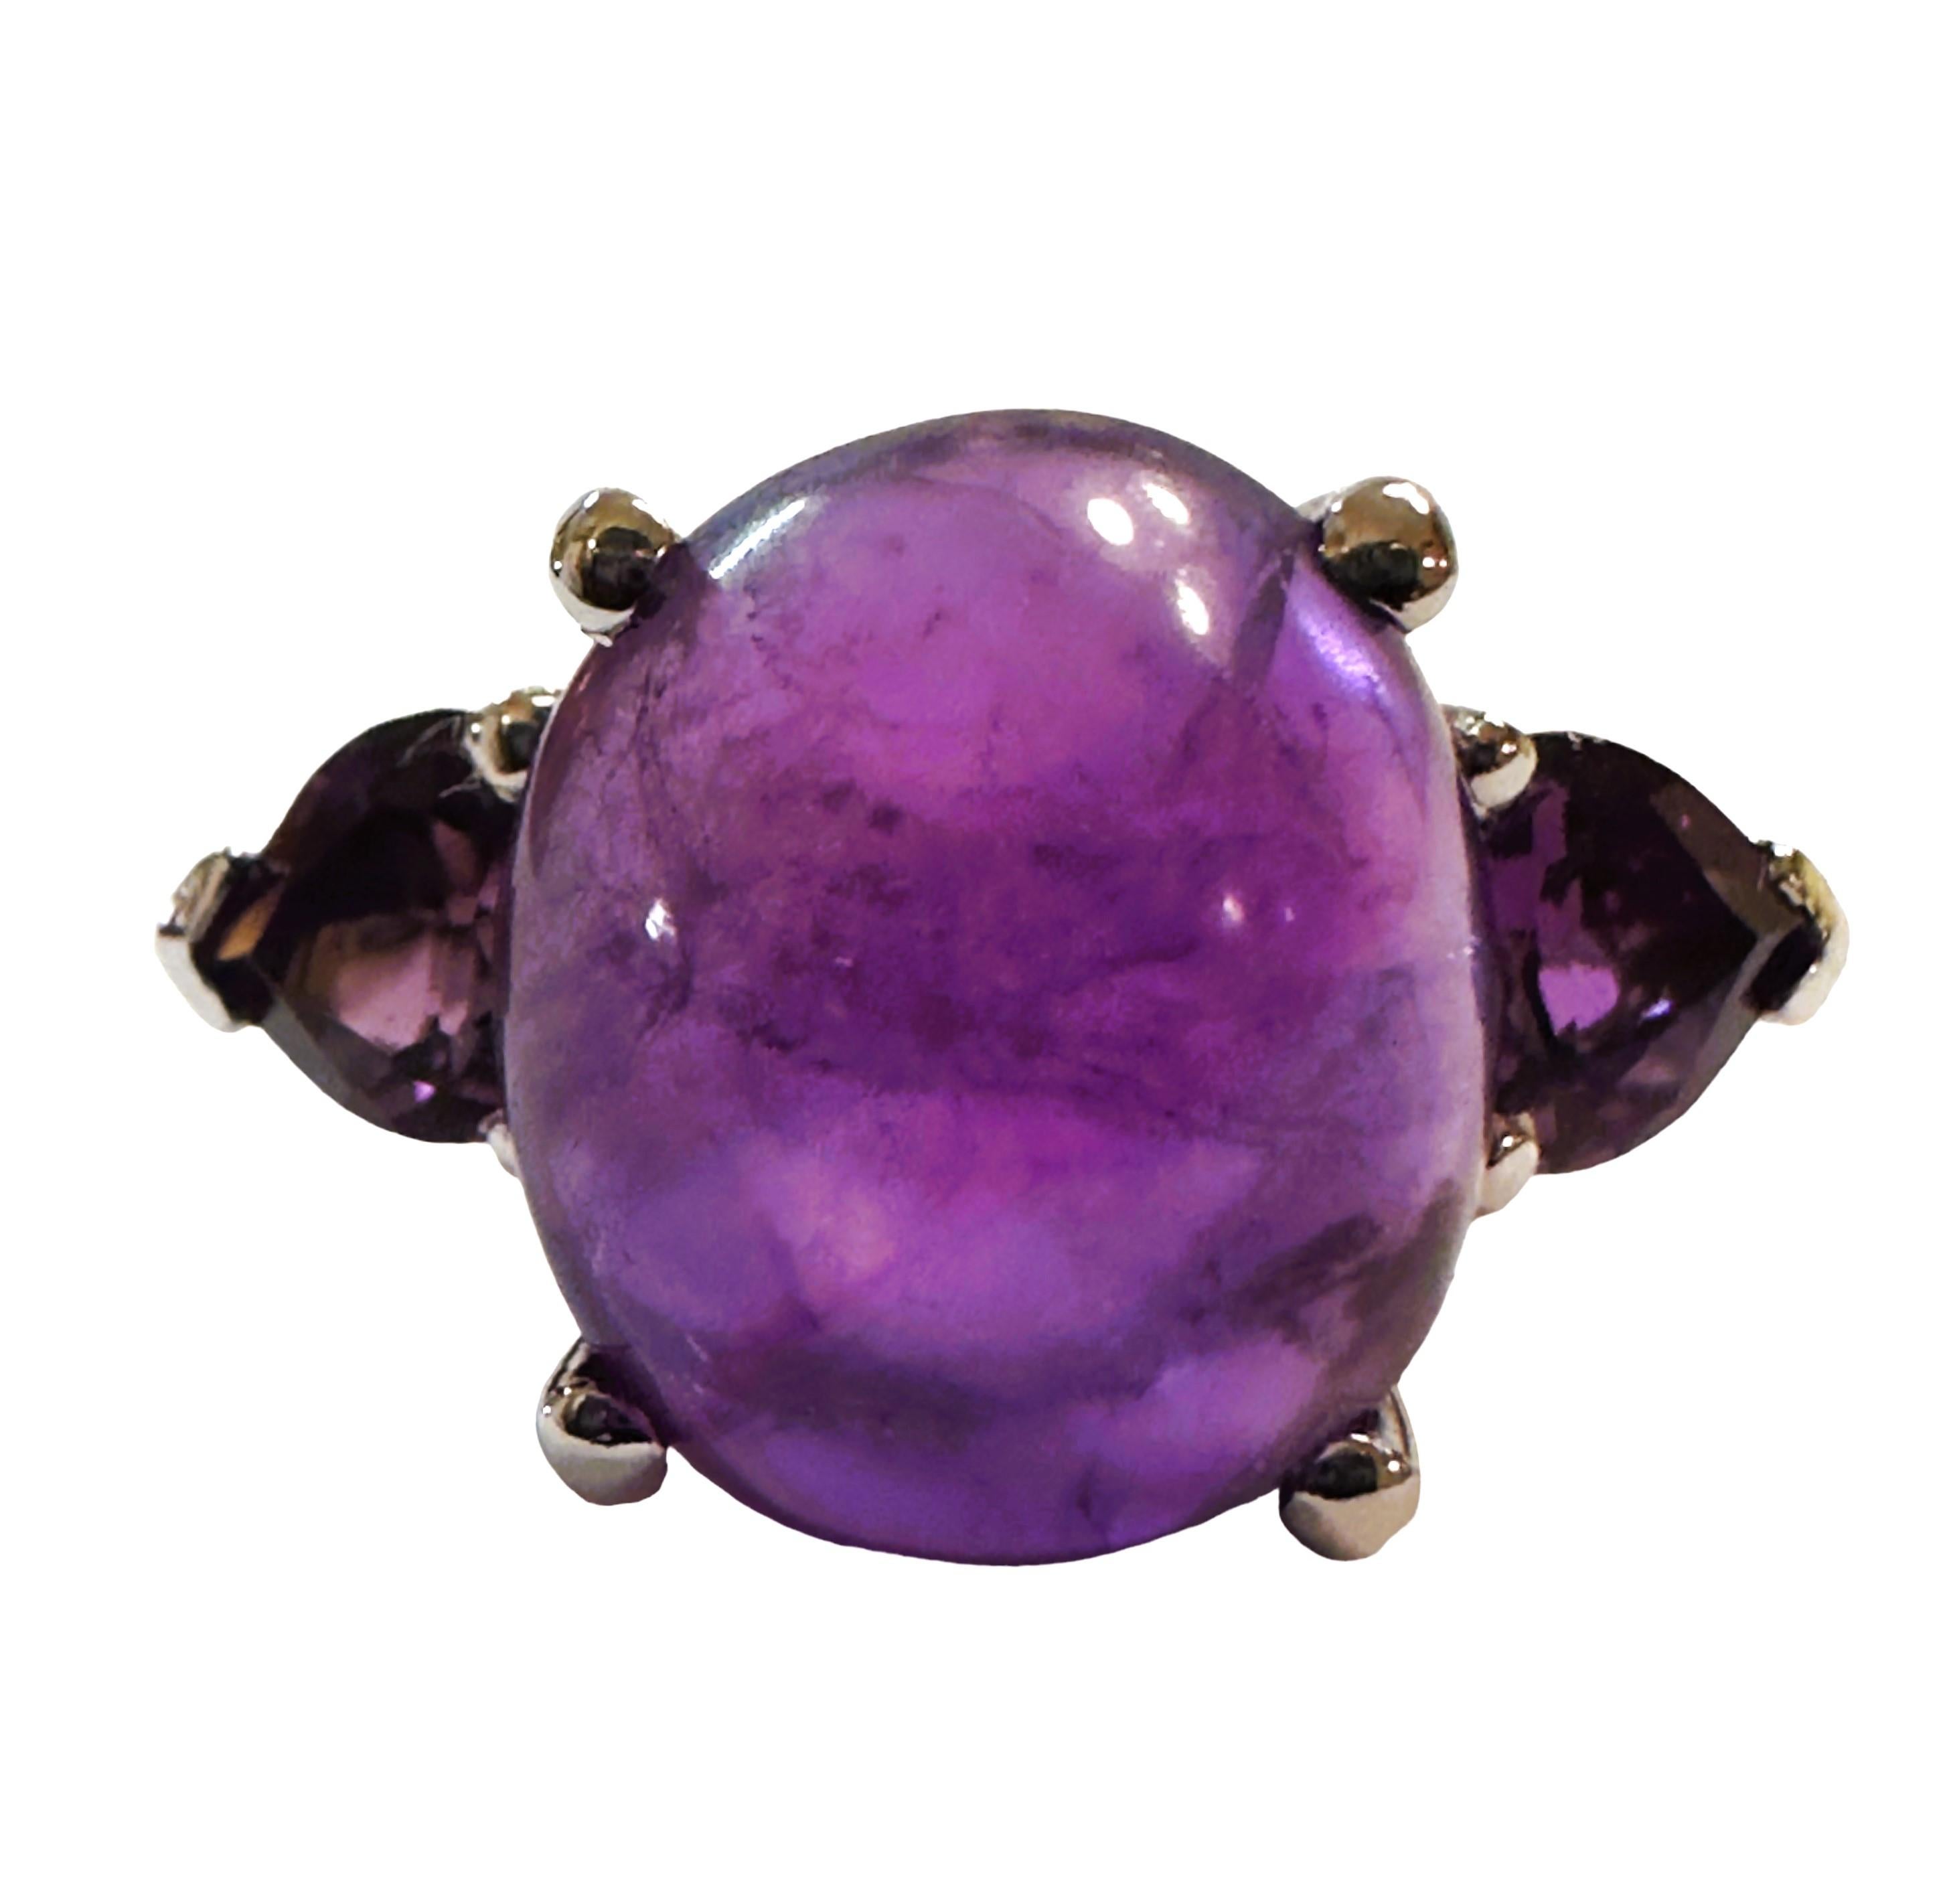 What beautiful colors in this ring!  The ring is a size 7.  It is from Brazil and is just exquisite.  It is a highly rated stone.  It is an oval cut cabochon stone and is 7.3 Cts   The main stone is 12.3 x 10.5 mm and it is flanked by 2 beautiful